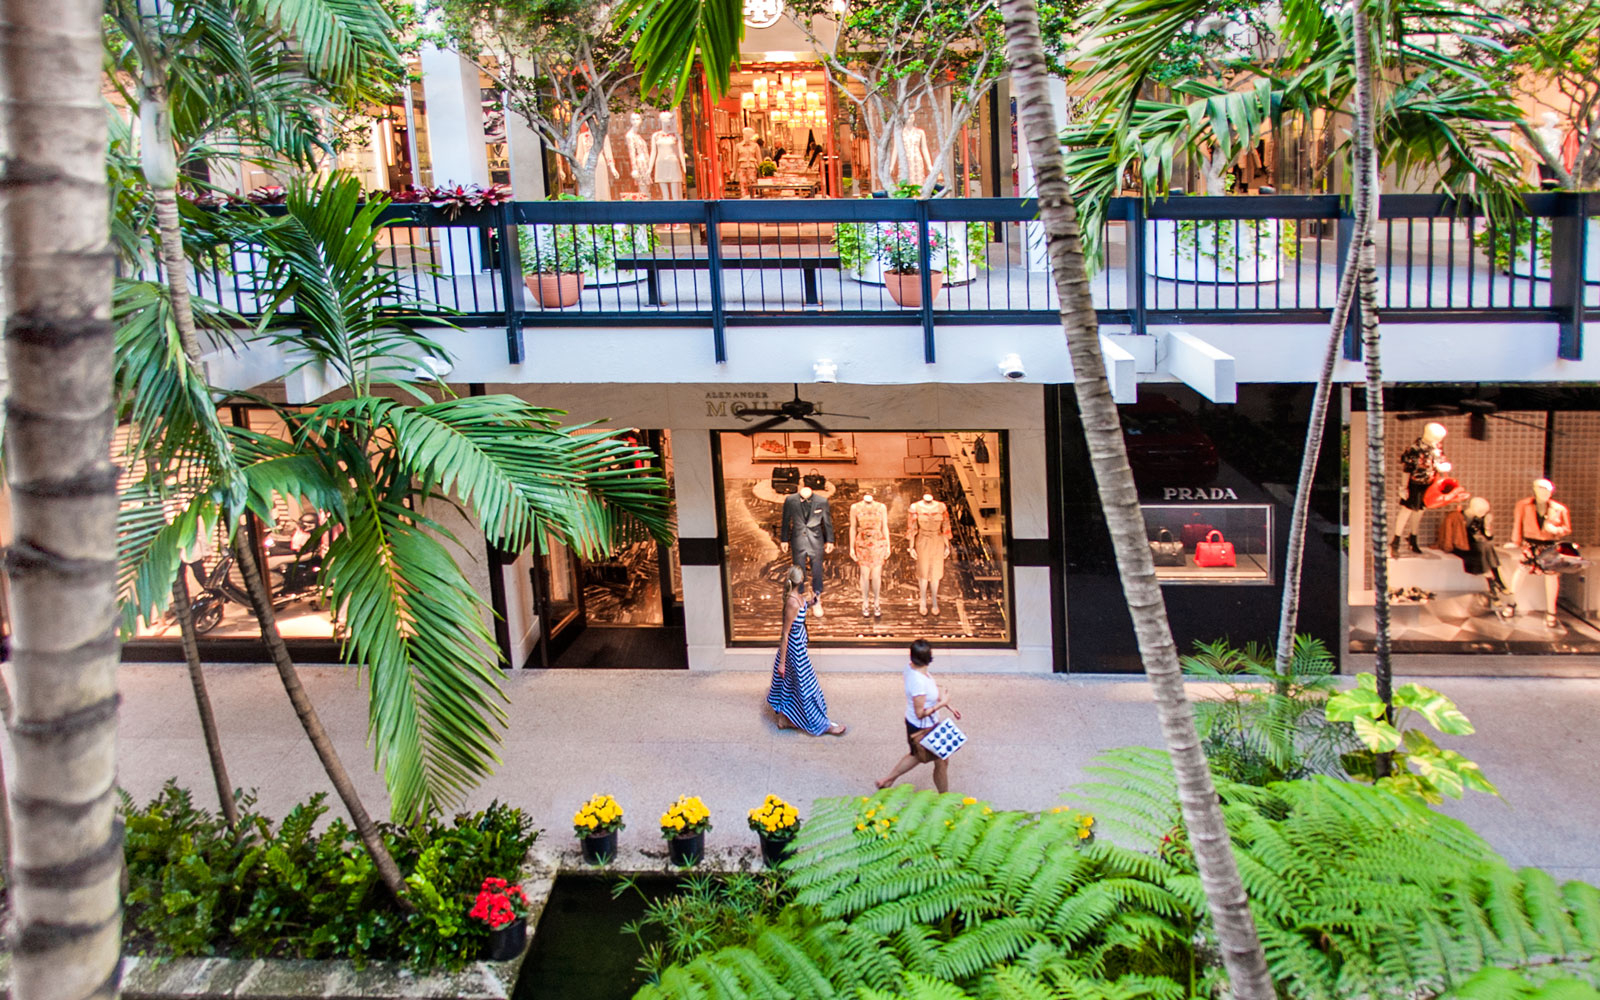 Miami’s Bal Harbour Shops Celebrates 50th Anniversary with ‘Fashion Project’ Film and Art Series